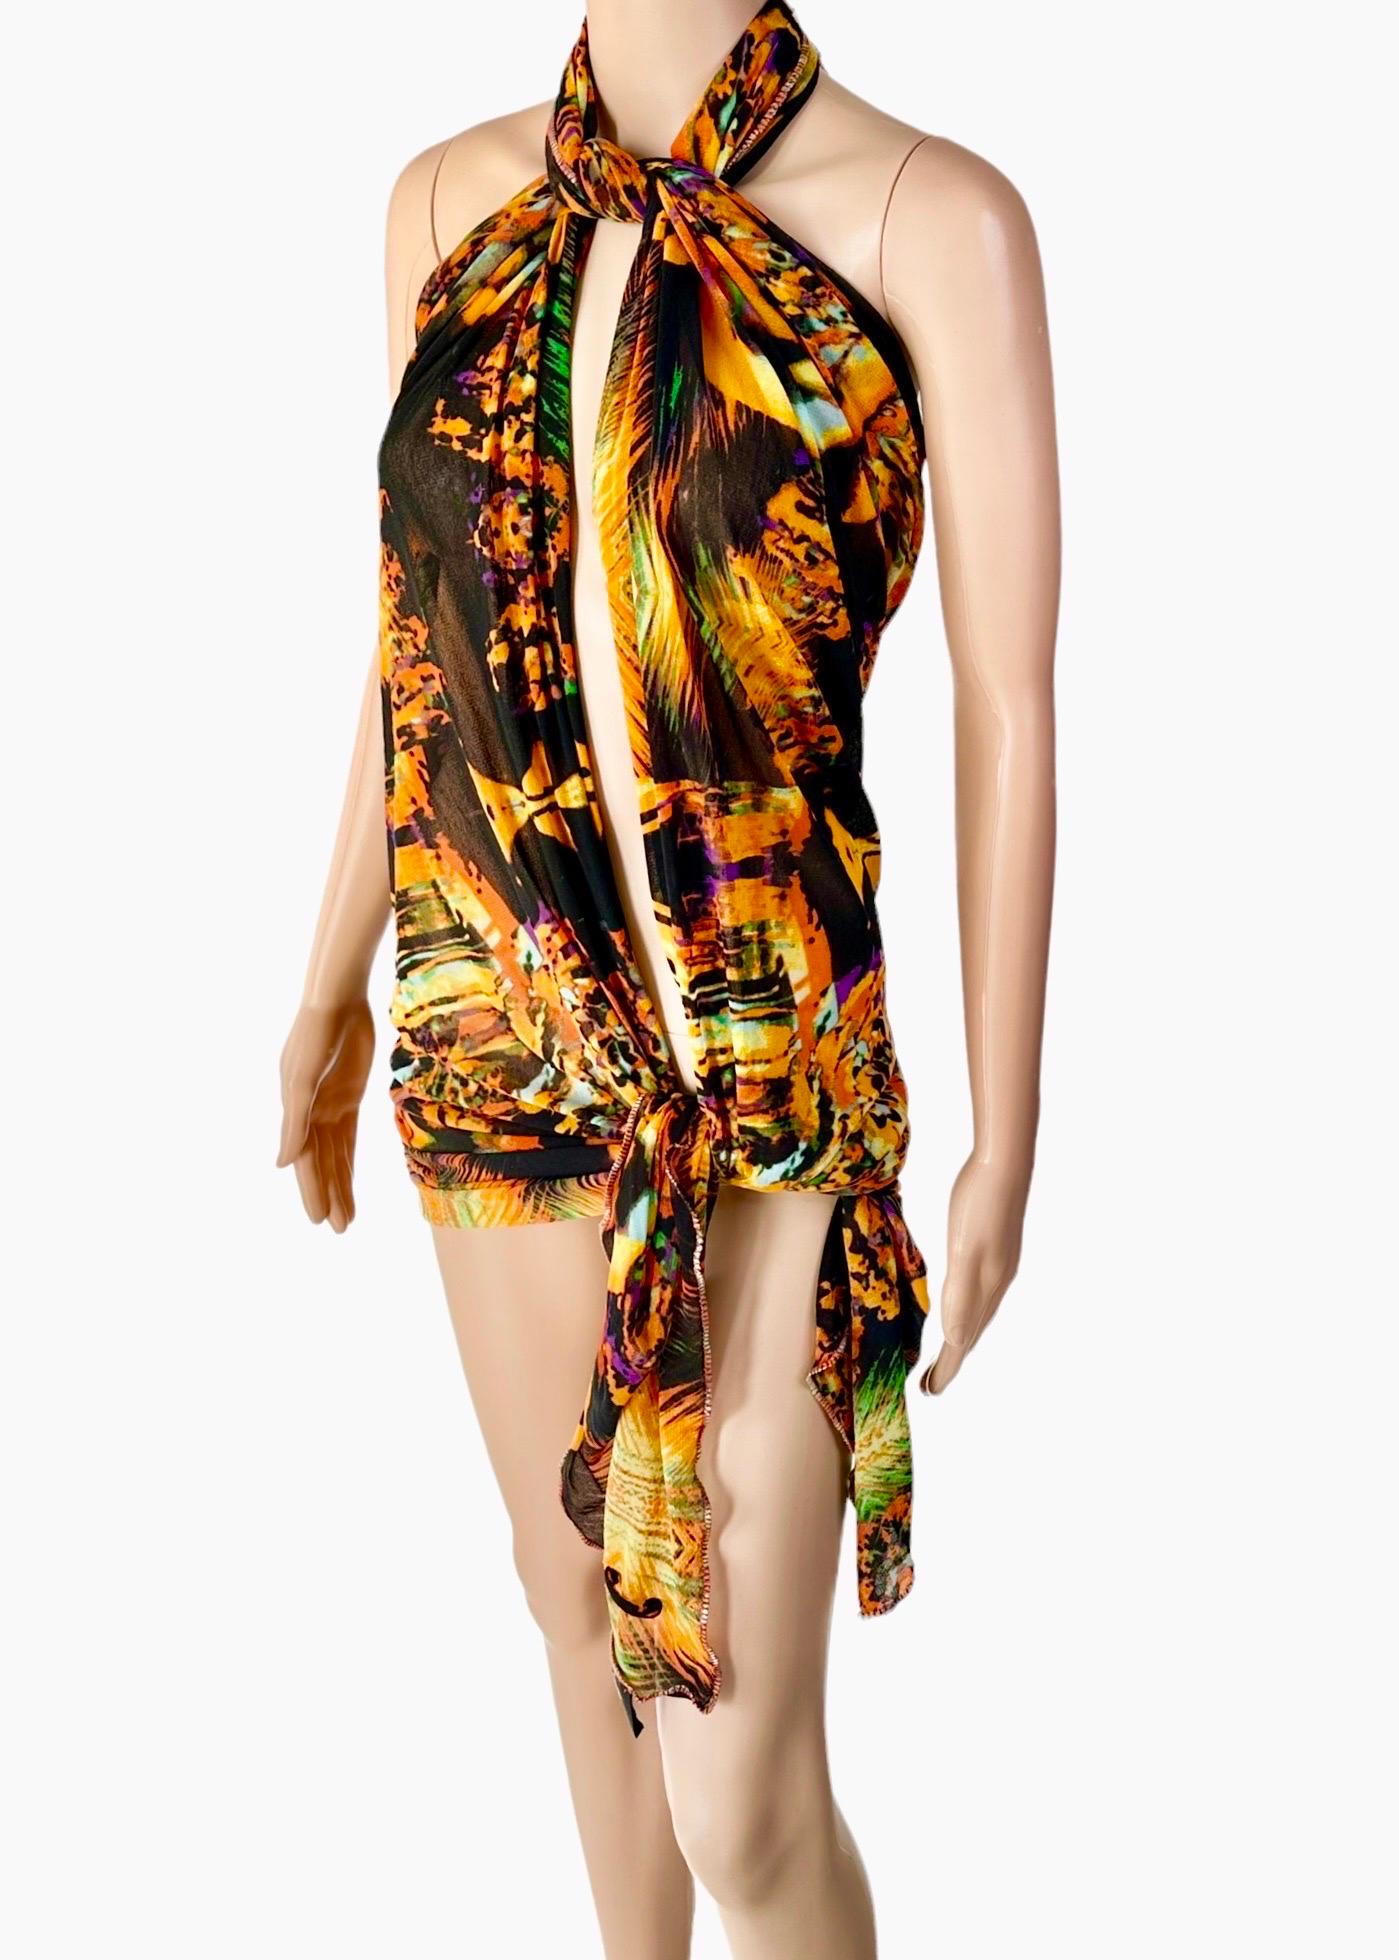 Jean Paul Gaultier S/S 2000 Psychedelic Print Mesh Wrap Dress Scarf Sarong Pareo 8